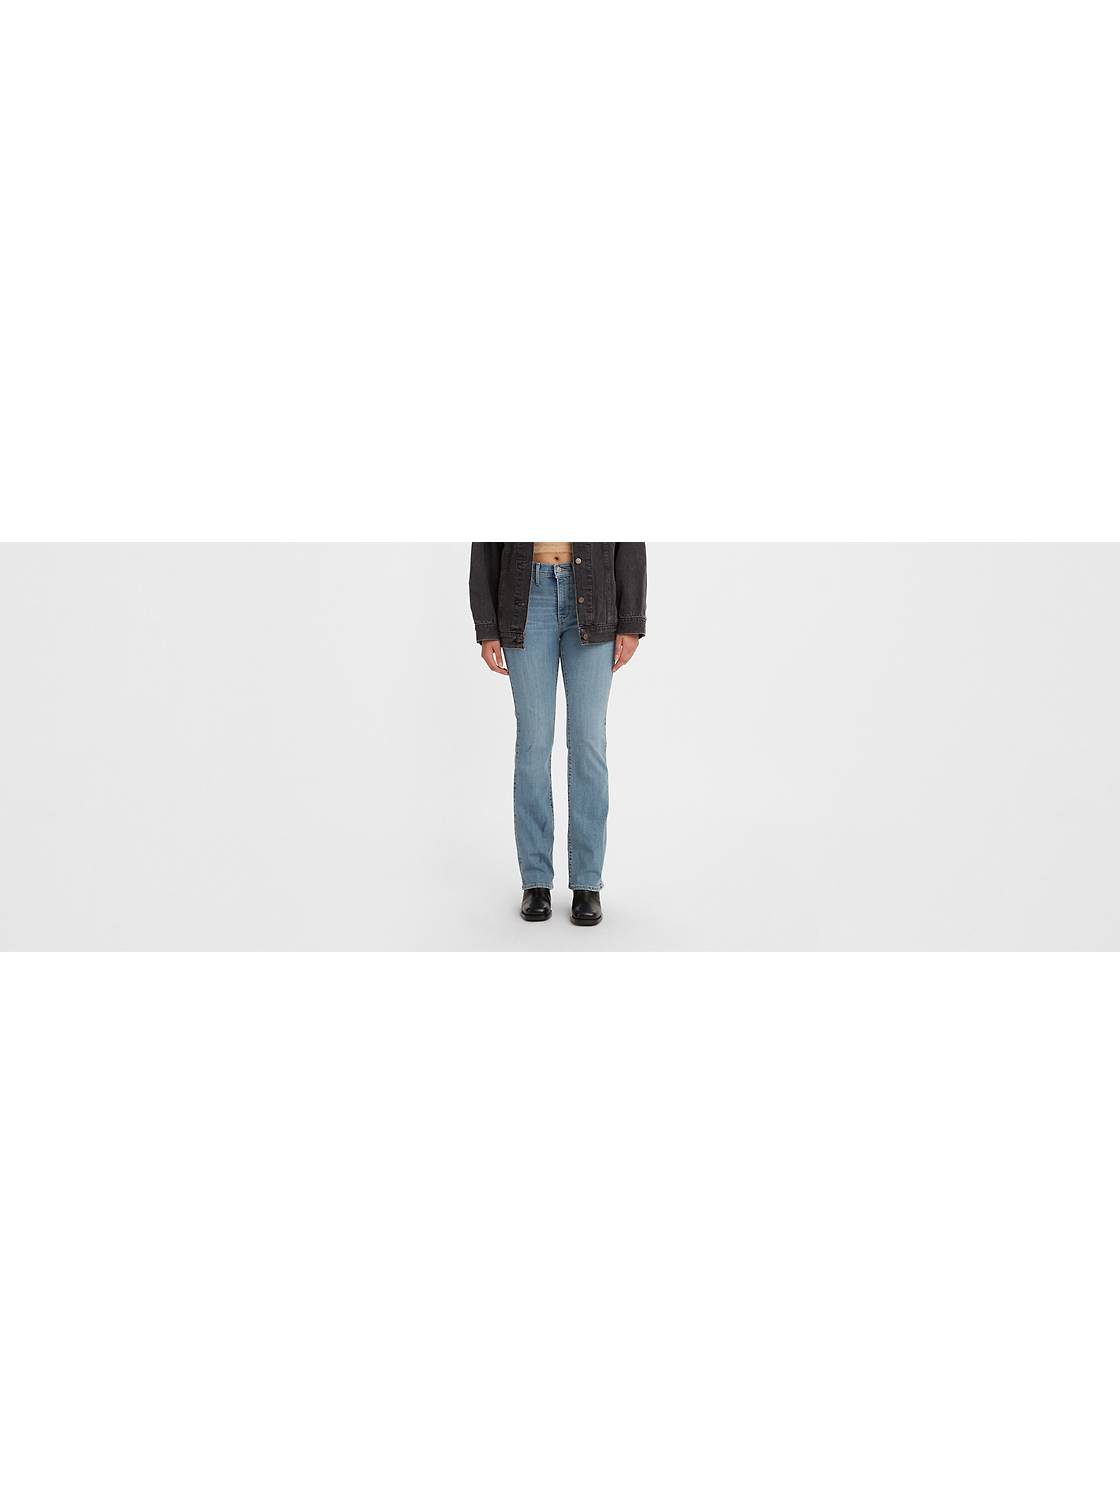 Signature by Levi Strauss & Co. Gold Label Women's Totally Shaping Bootcut  Jeans (Available in Plus Size), (New) Crackleton, 10 Short at   Women's Jeans store